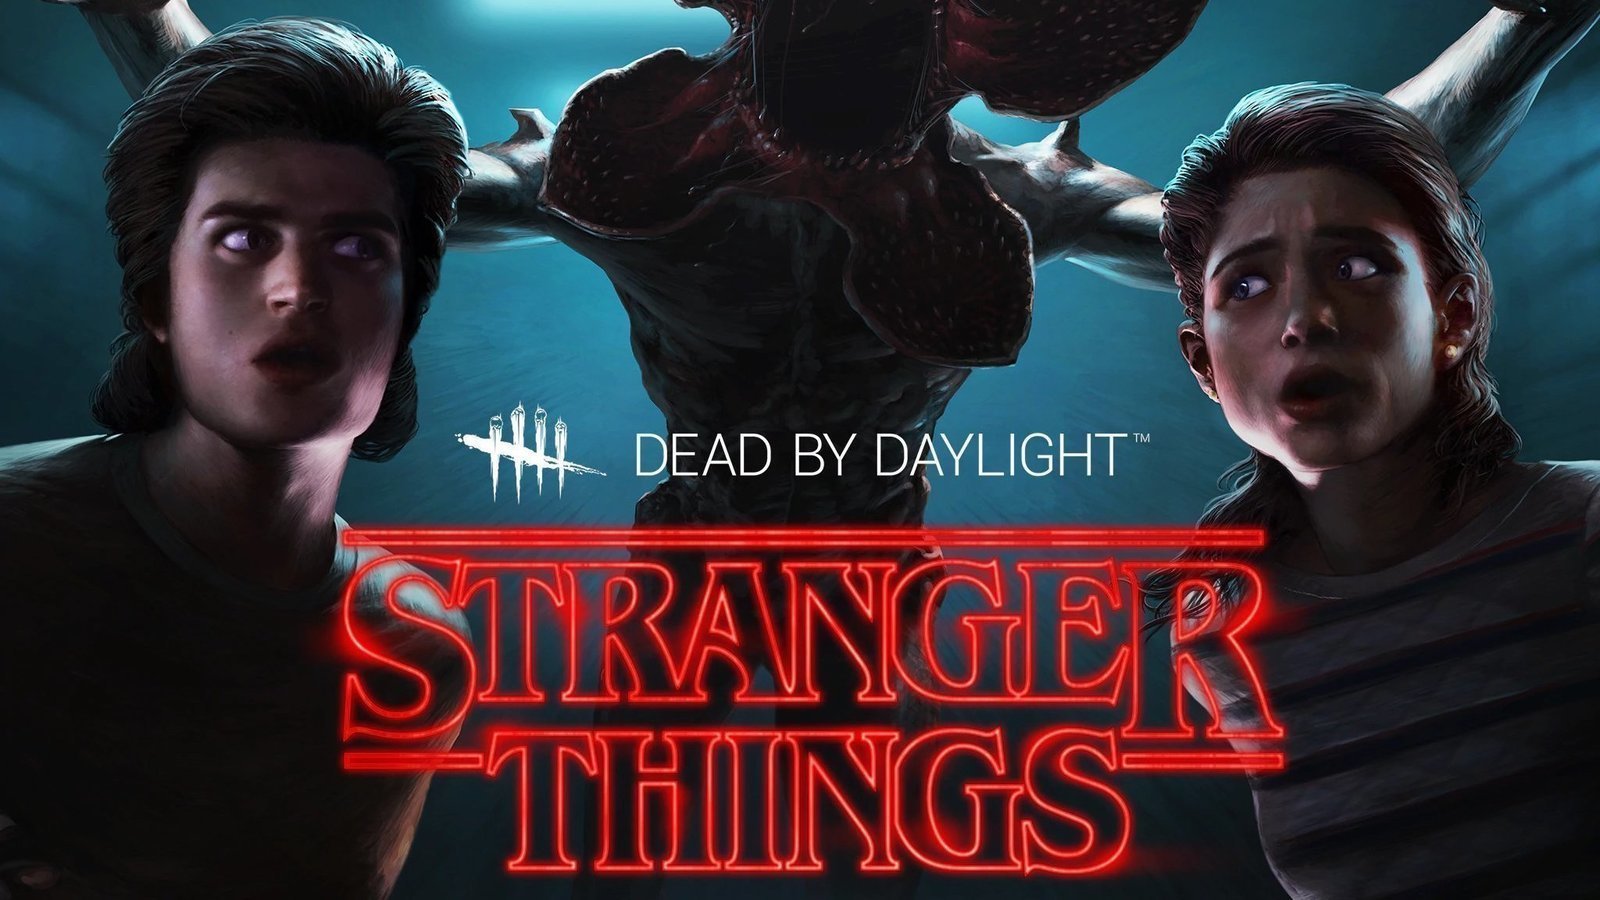 Petizione · Keep Stranger Things Content In Dead By Daylight · Change.org